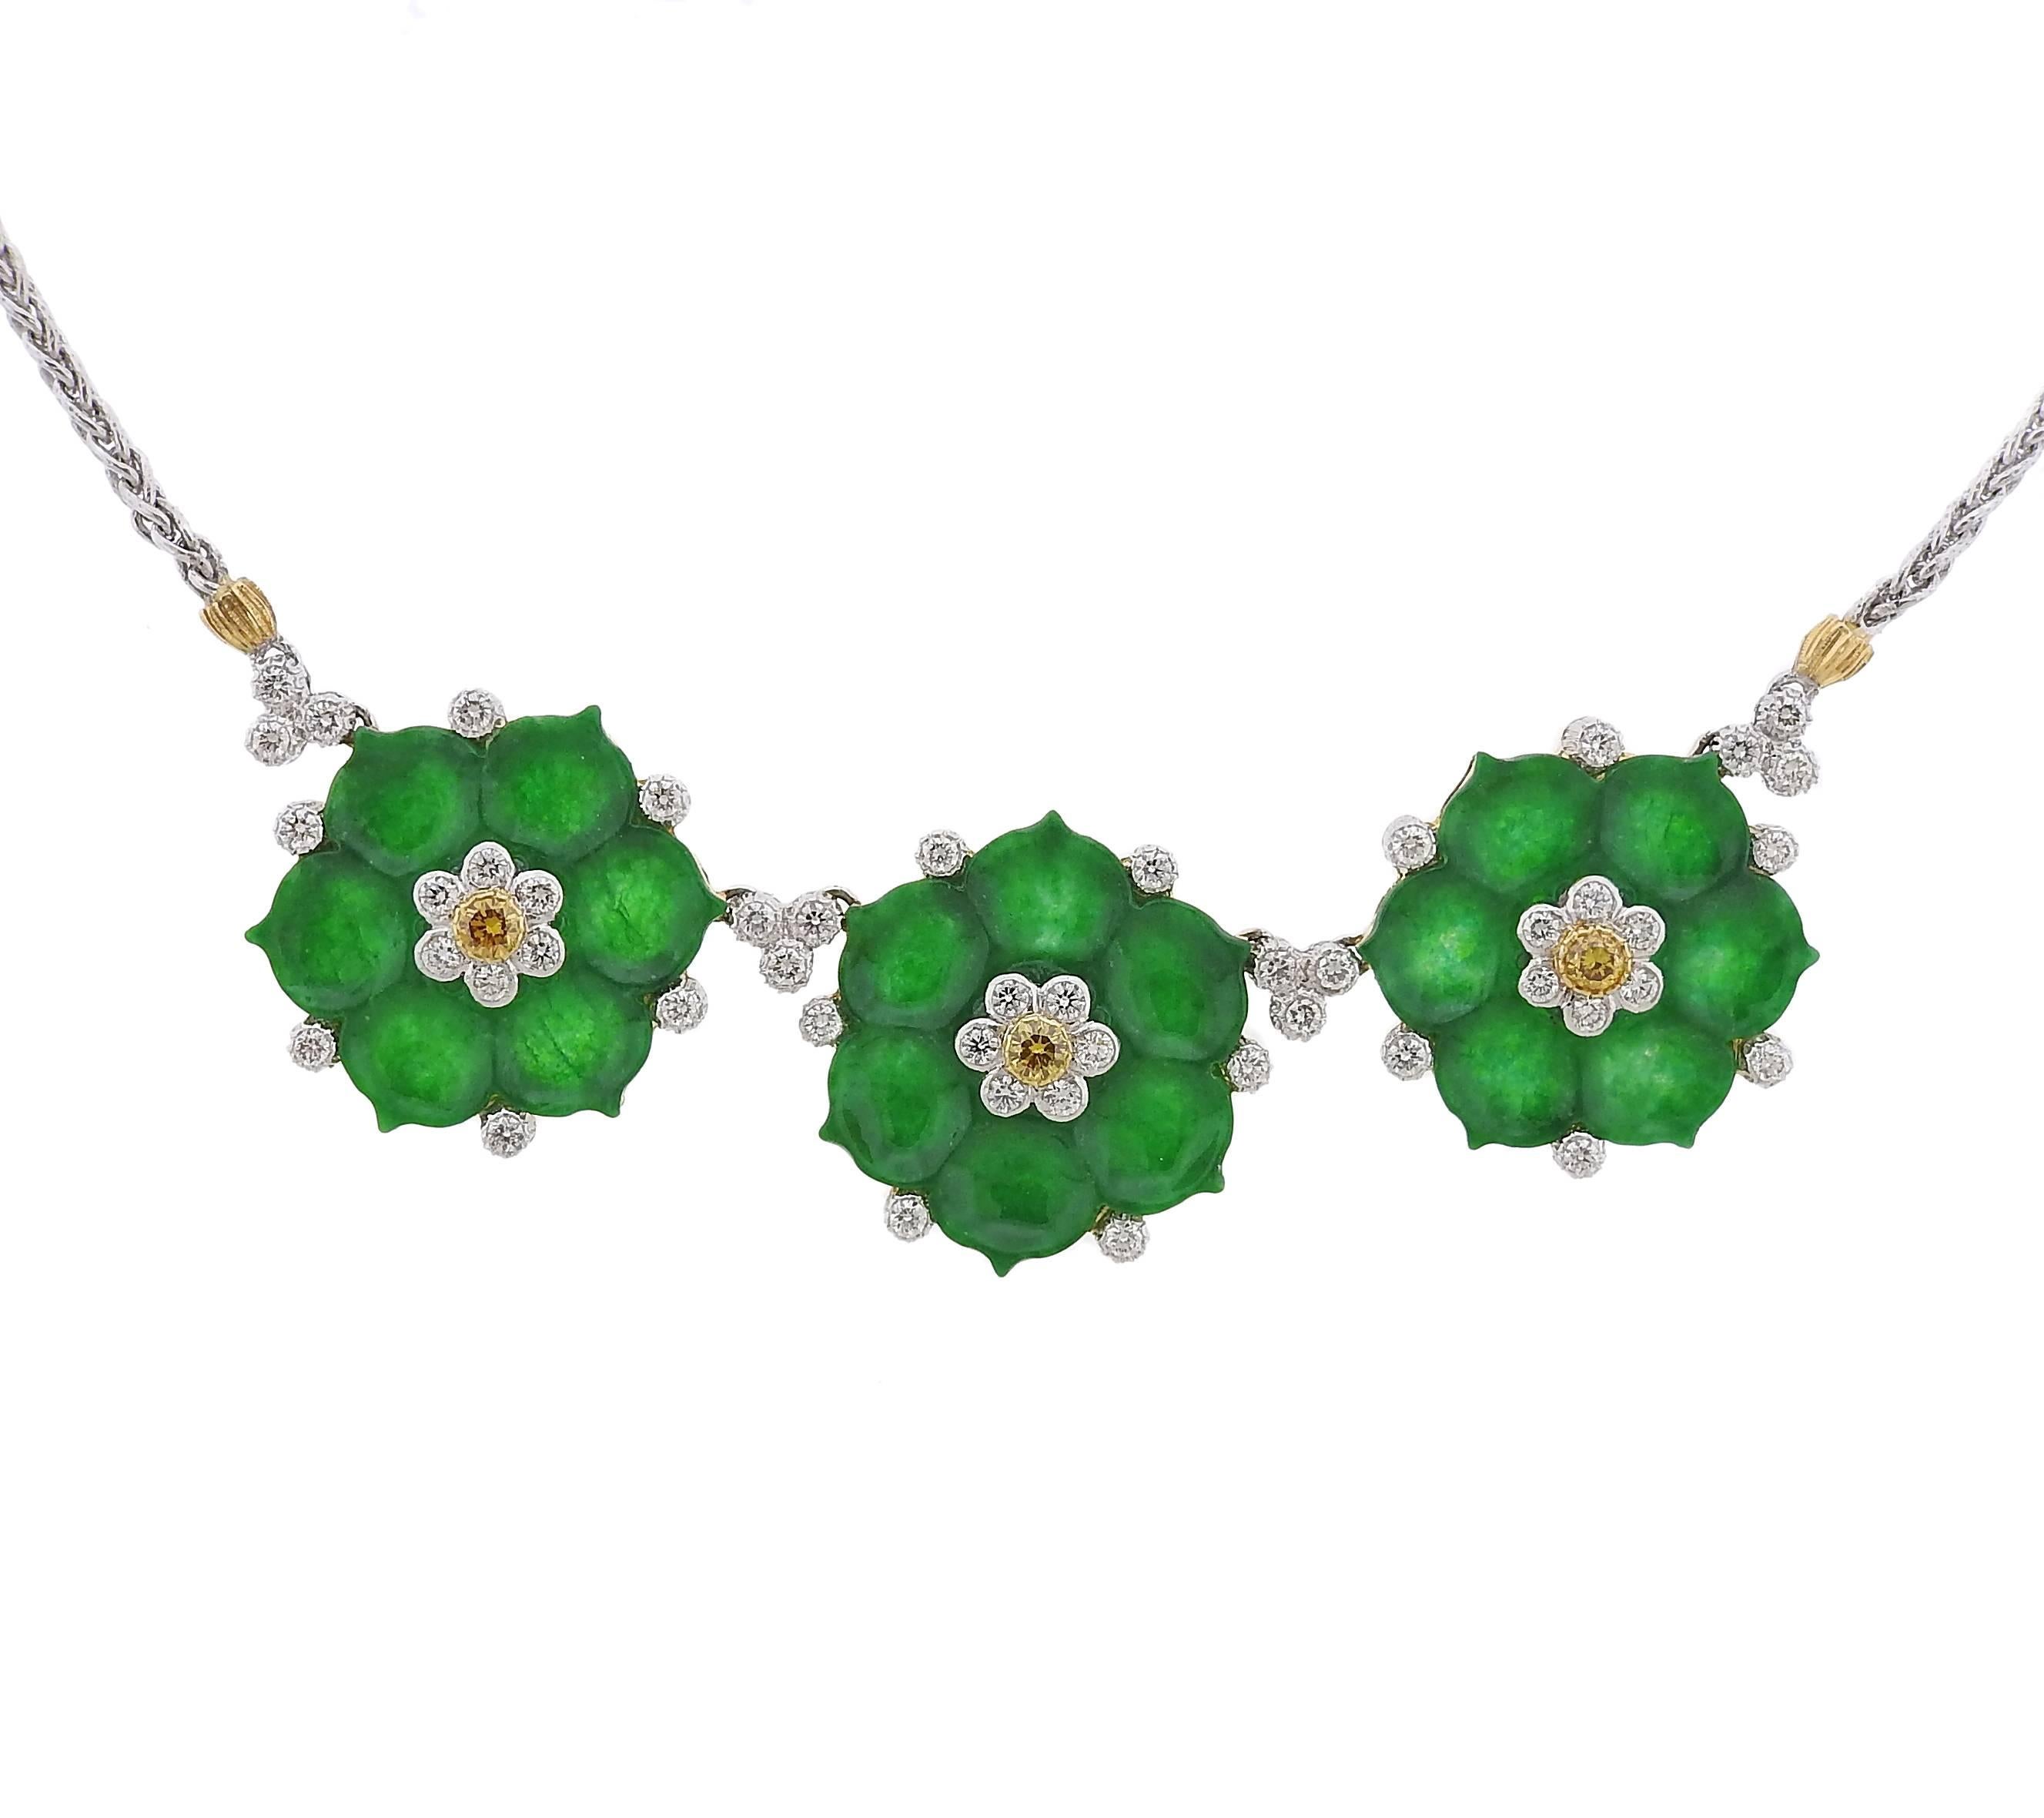 An 18k yellow and white gold necklace, crafted by Buccellati, featuring three flower pendants, decorated with carved jade and approximately 0.85ctw in diamonds. Necklace is 16 inches long, each flower measures 22mm x 24mm. Marked: Buccellati, 18k.